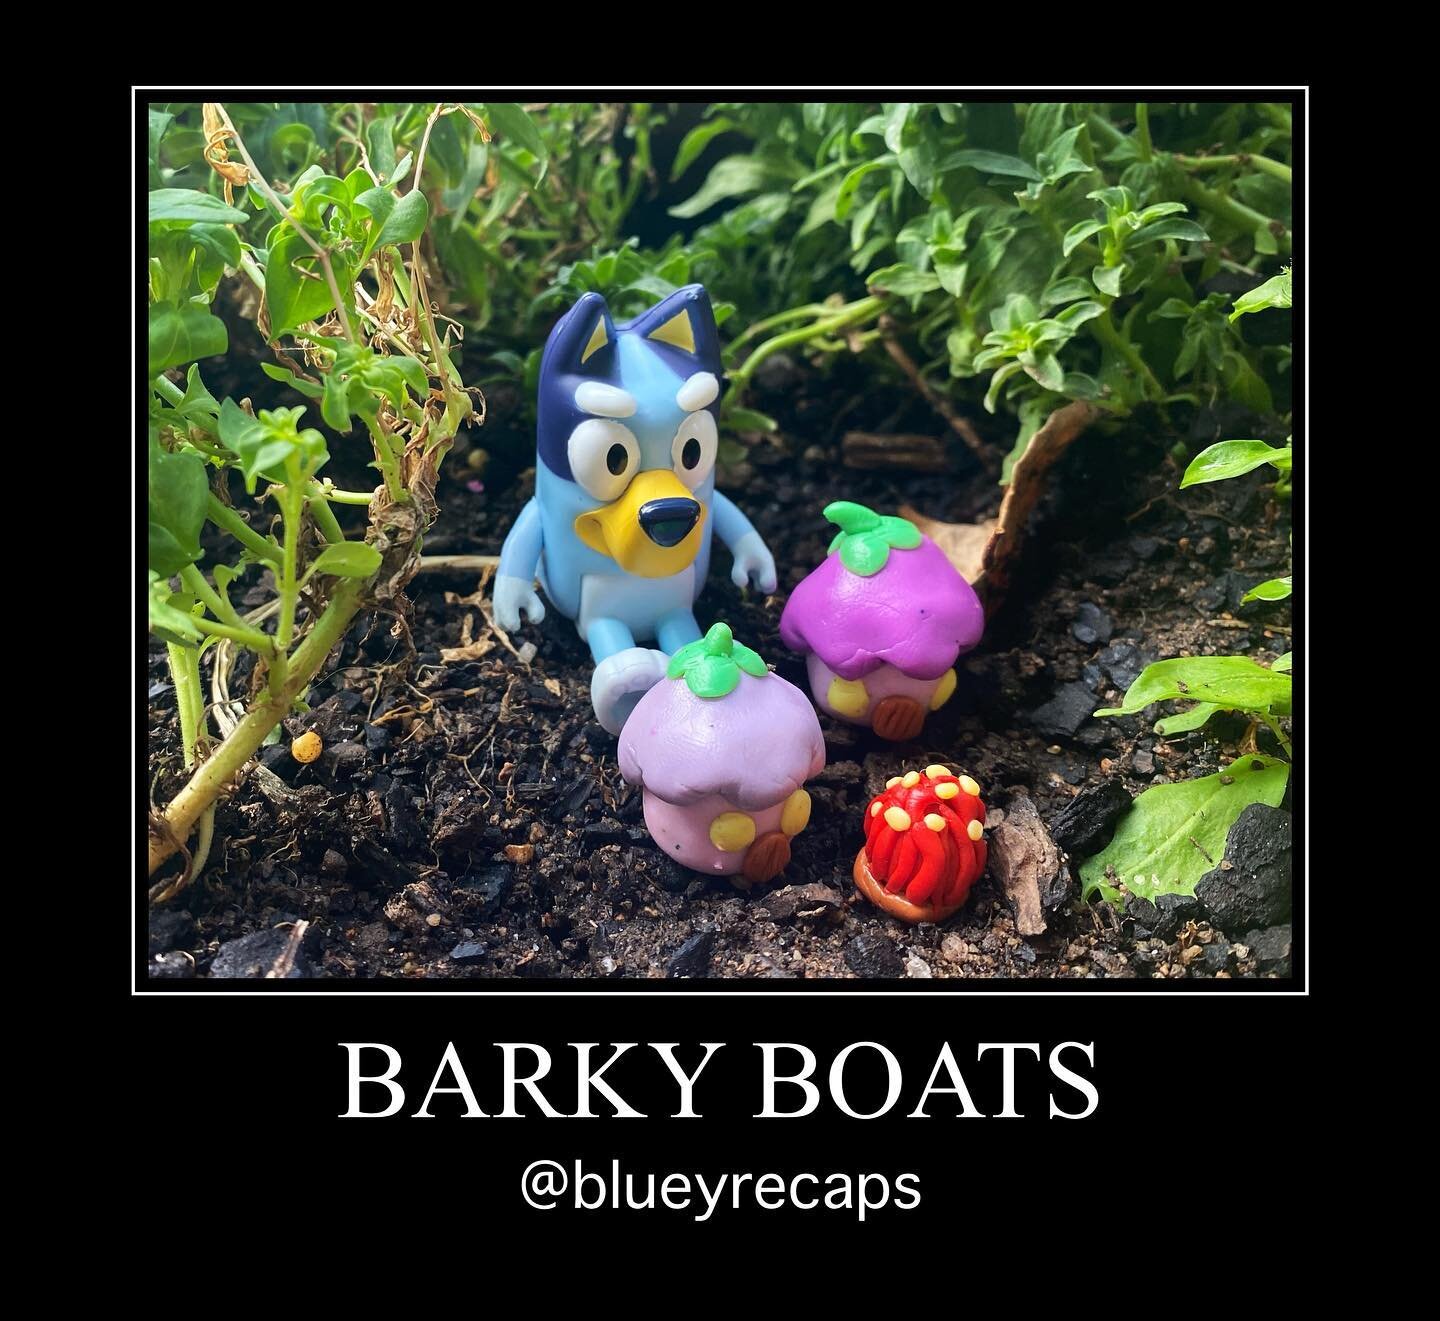 Bluey Recap: Barky Boats (#2.33)
#bestbits: Calypso&rsquo;s analogy of teenage hormones being like a bursting dam
#lifelesson: year 6 buddies are the best, and teenage hormones are like a dam bursting 
.
Teacher Calypso tells the children that they h